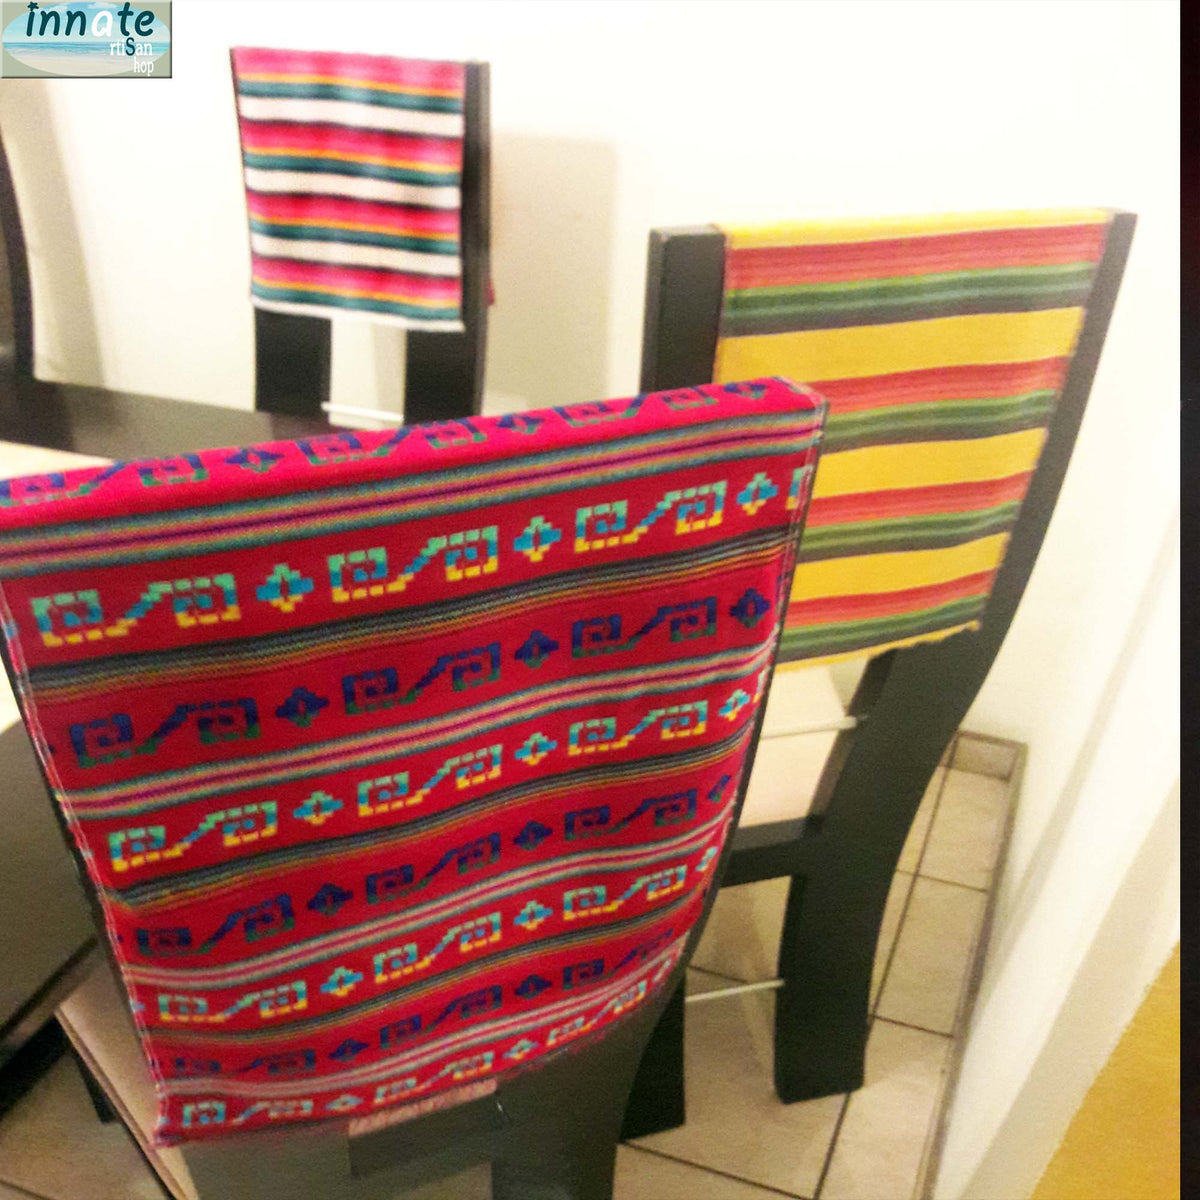 fiesta, table runners, Mexican, party, pack, tablecloths, cambaya, Mexican table runners